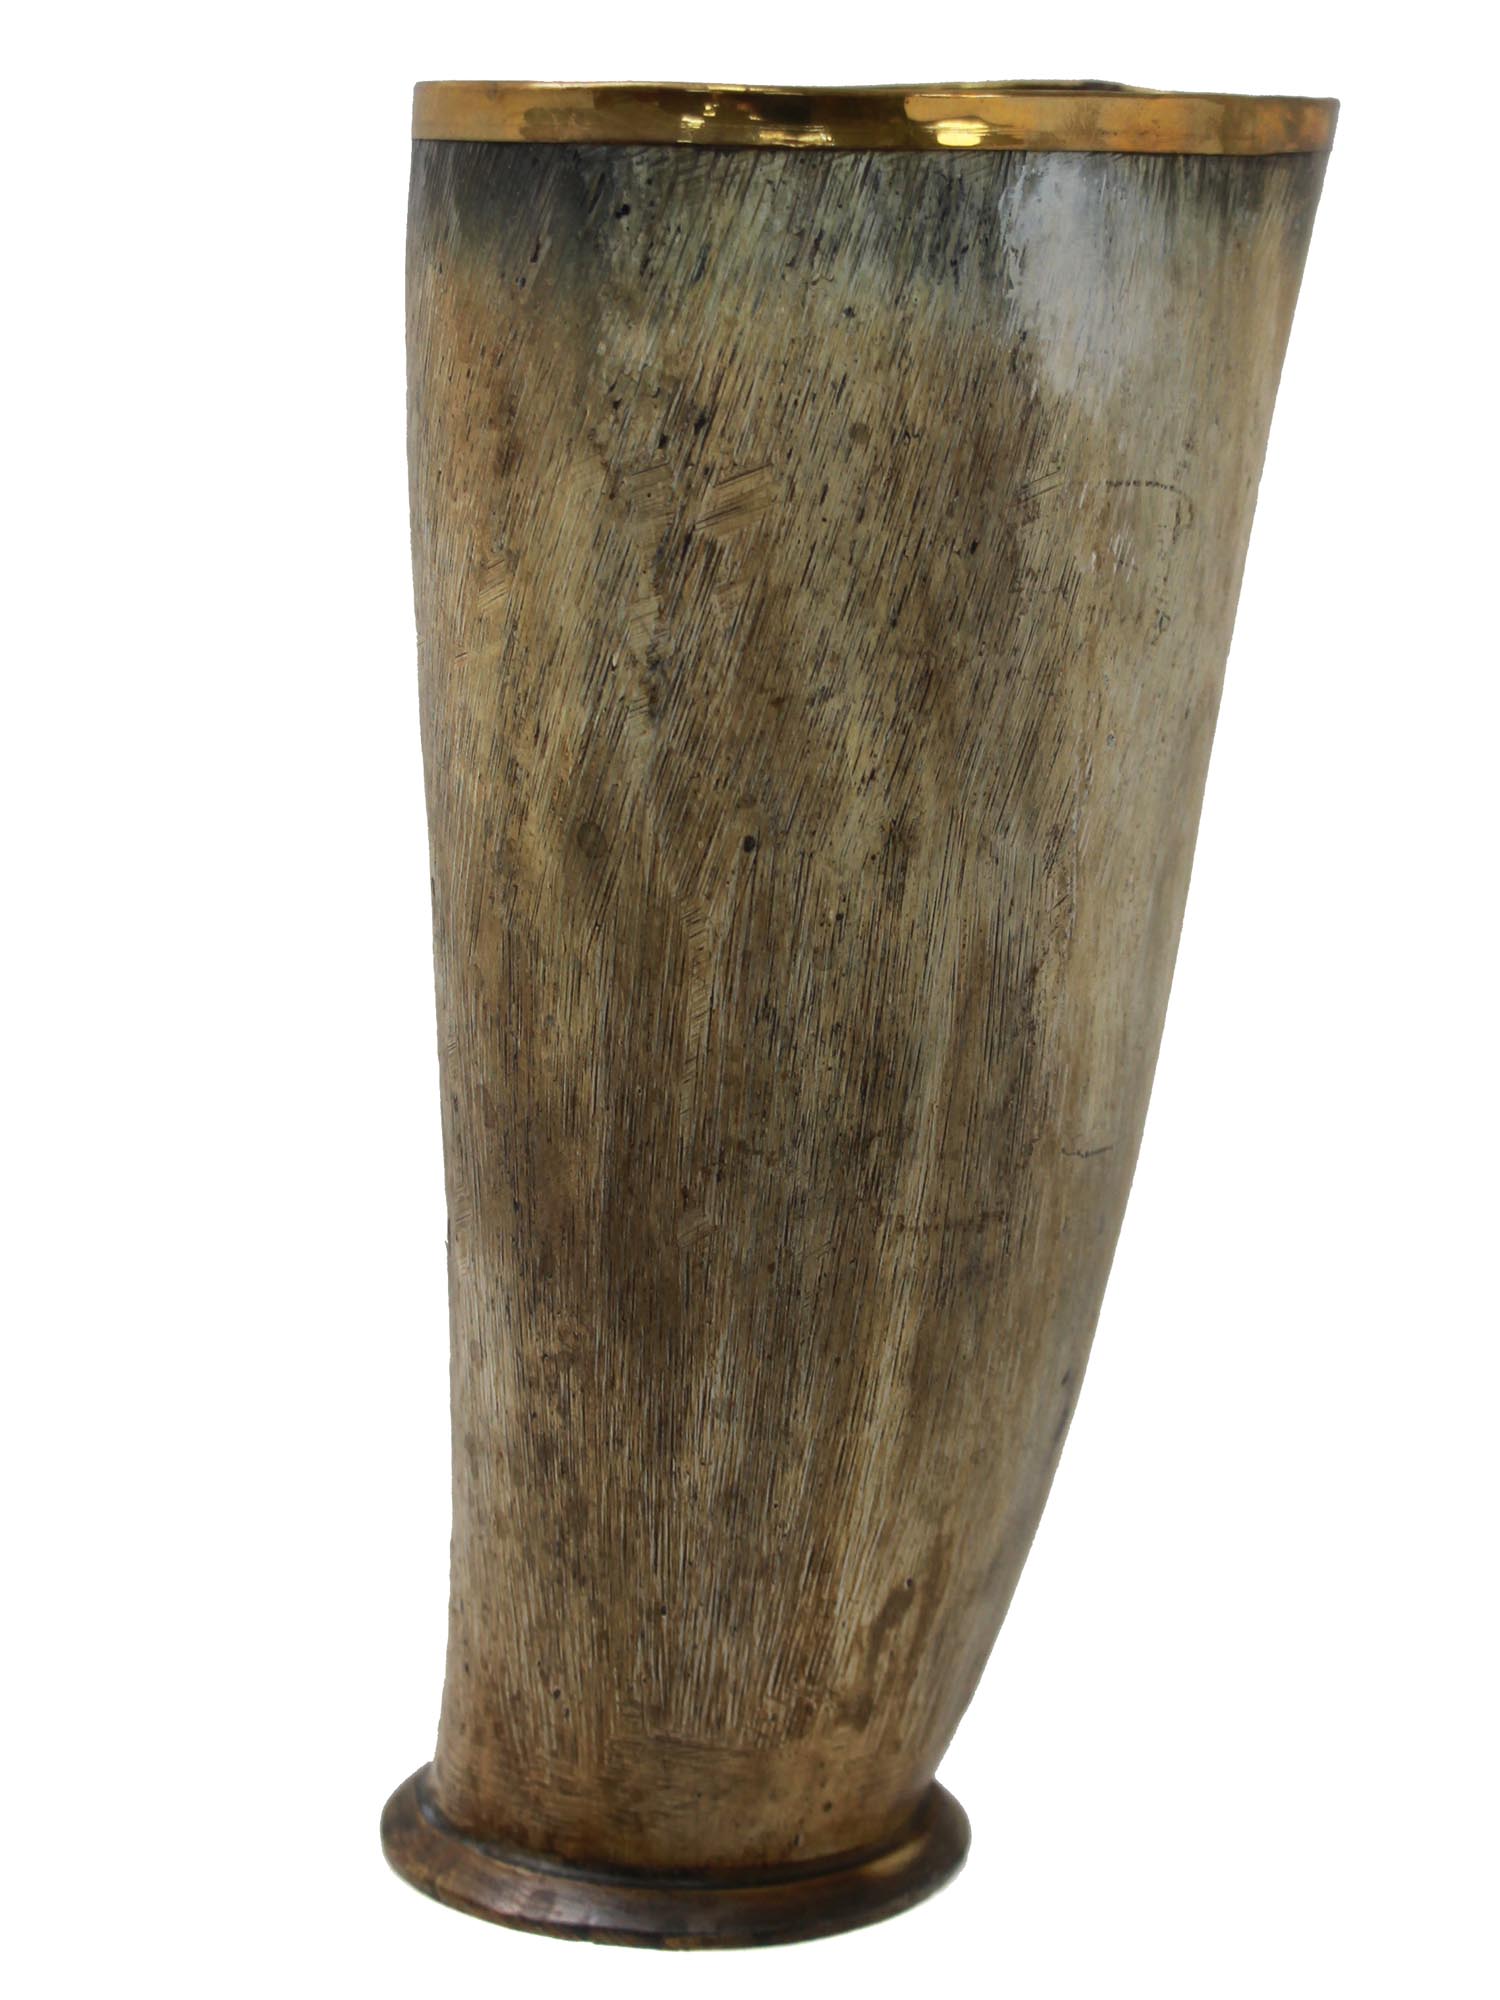 A LARGE ANTIQUE DRINKING CUP MADE OF HORN PIC-3